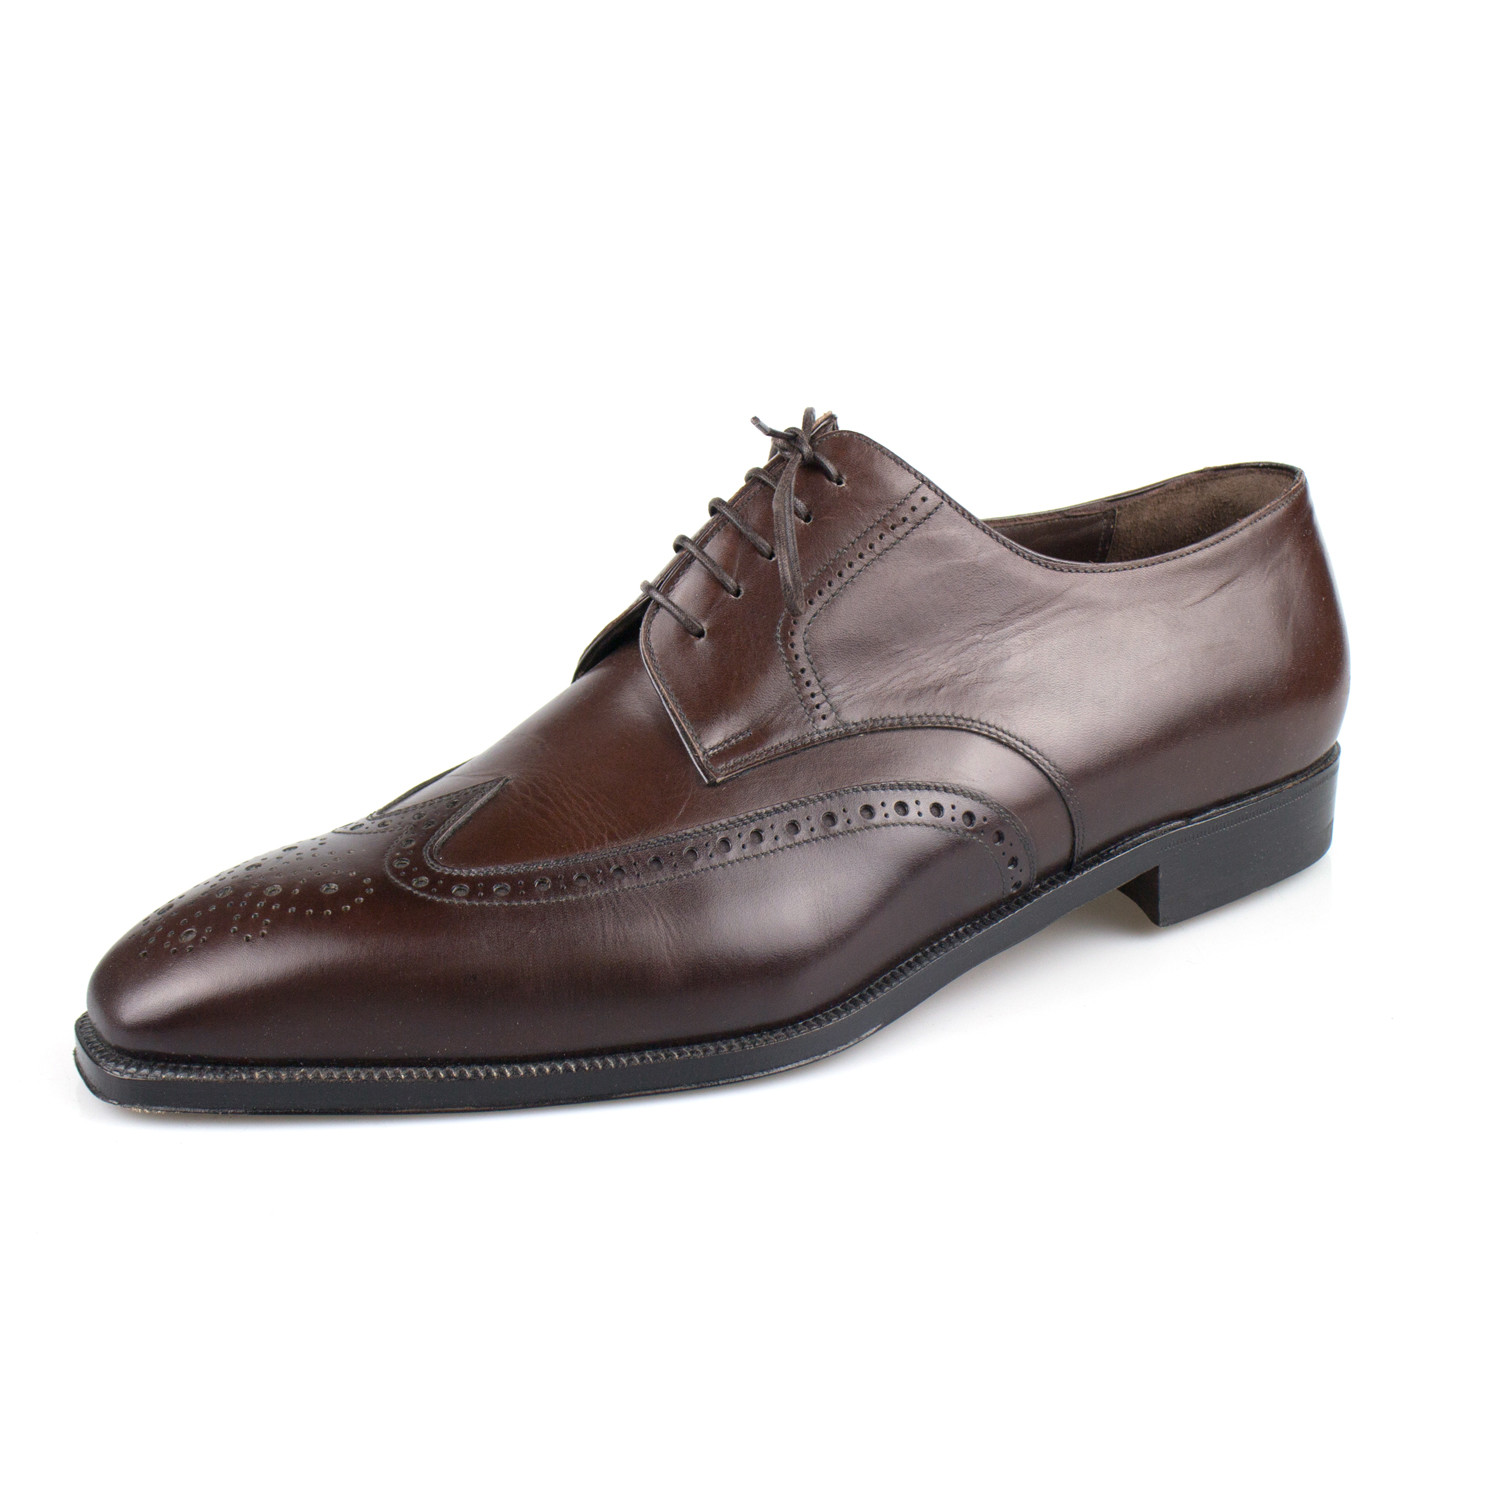 Brioni // Leather Brogue Pattern Oxford Dress Shoes // Brown (US: 8.5 ...